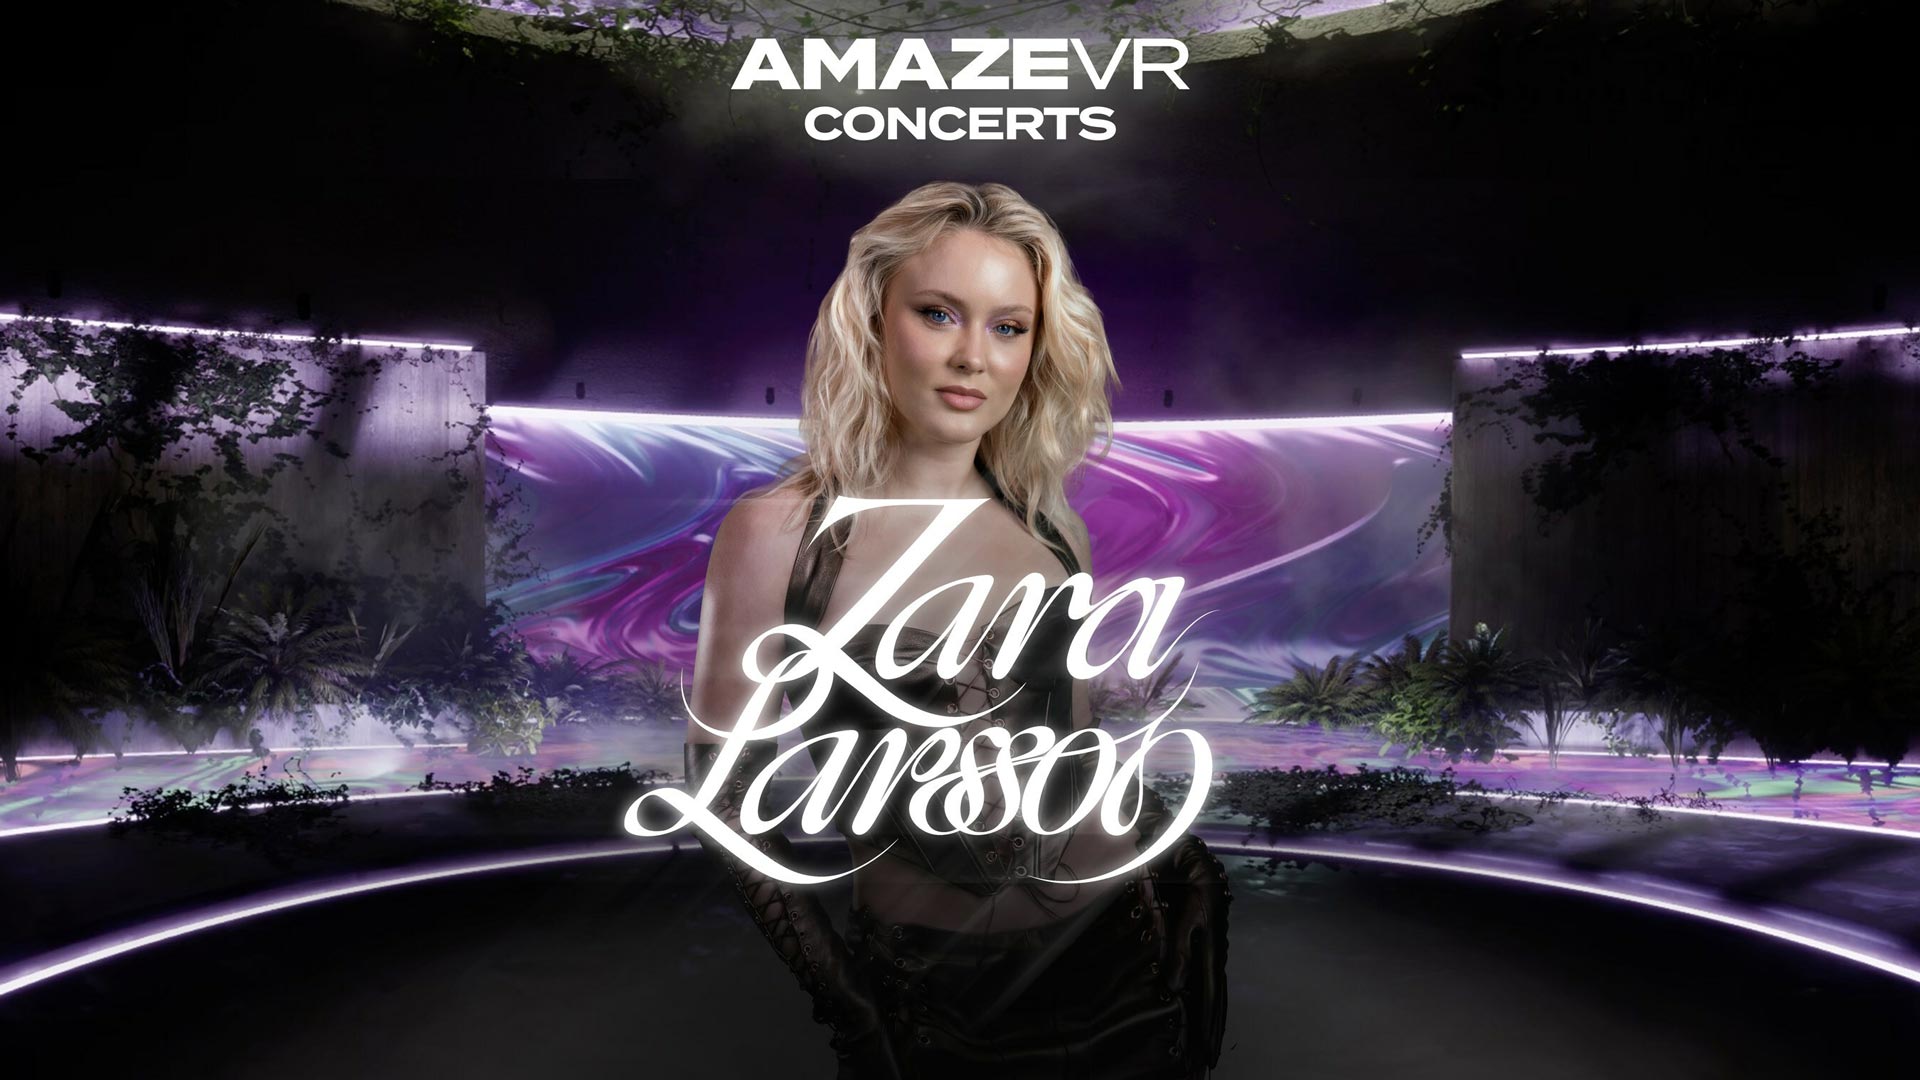 AmazeVR Concerts review: Zara Larsson’s performance is a nice one to watch